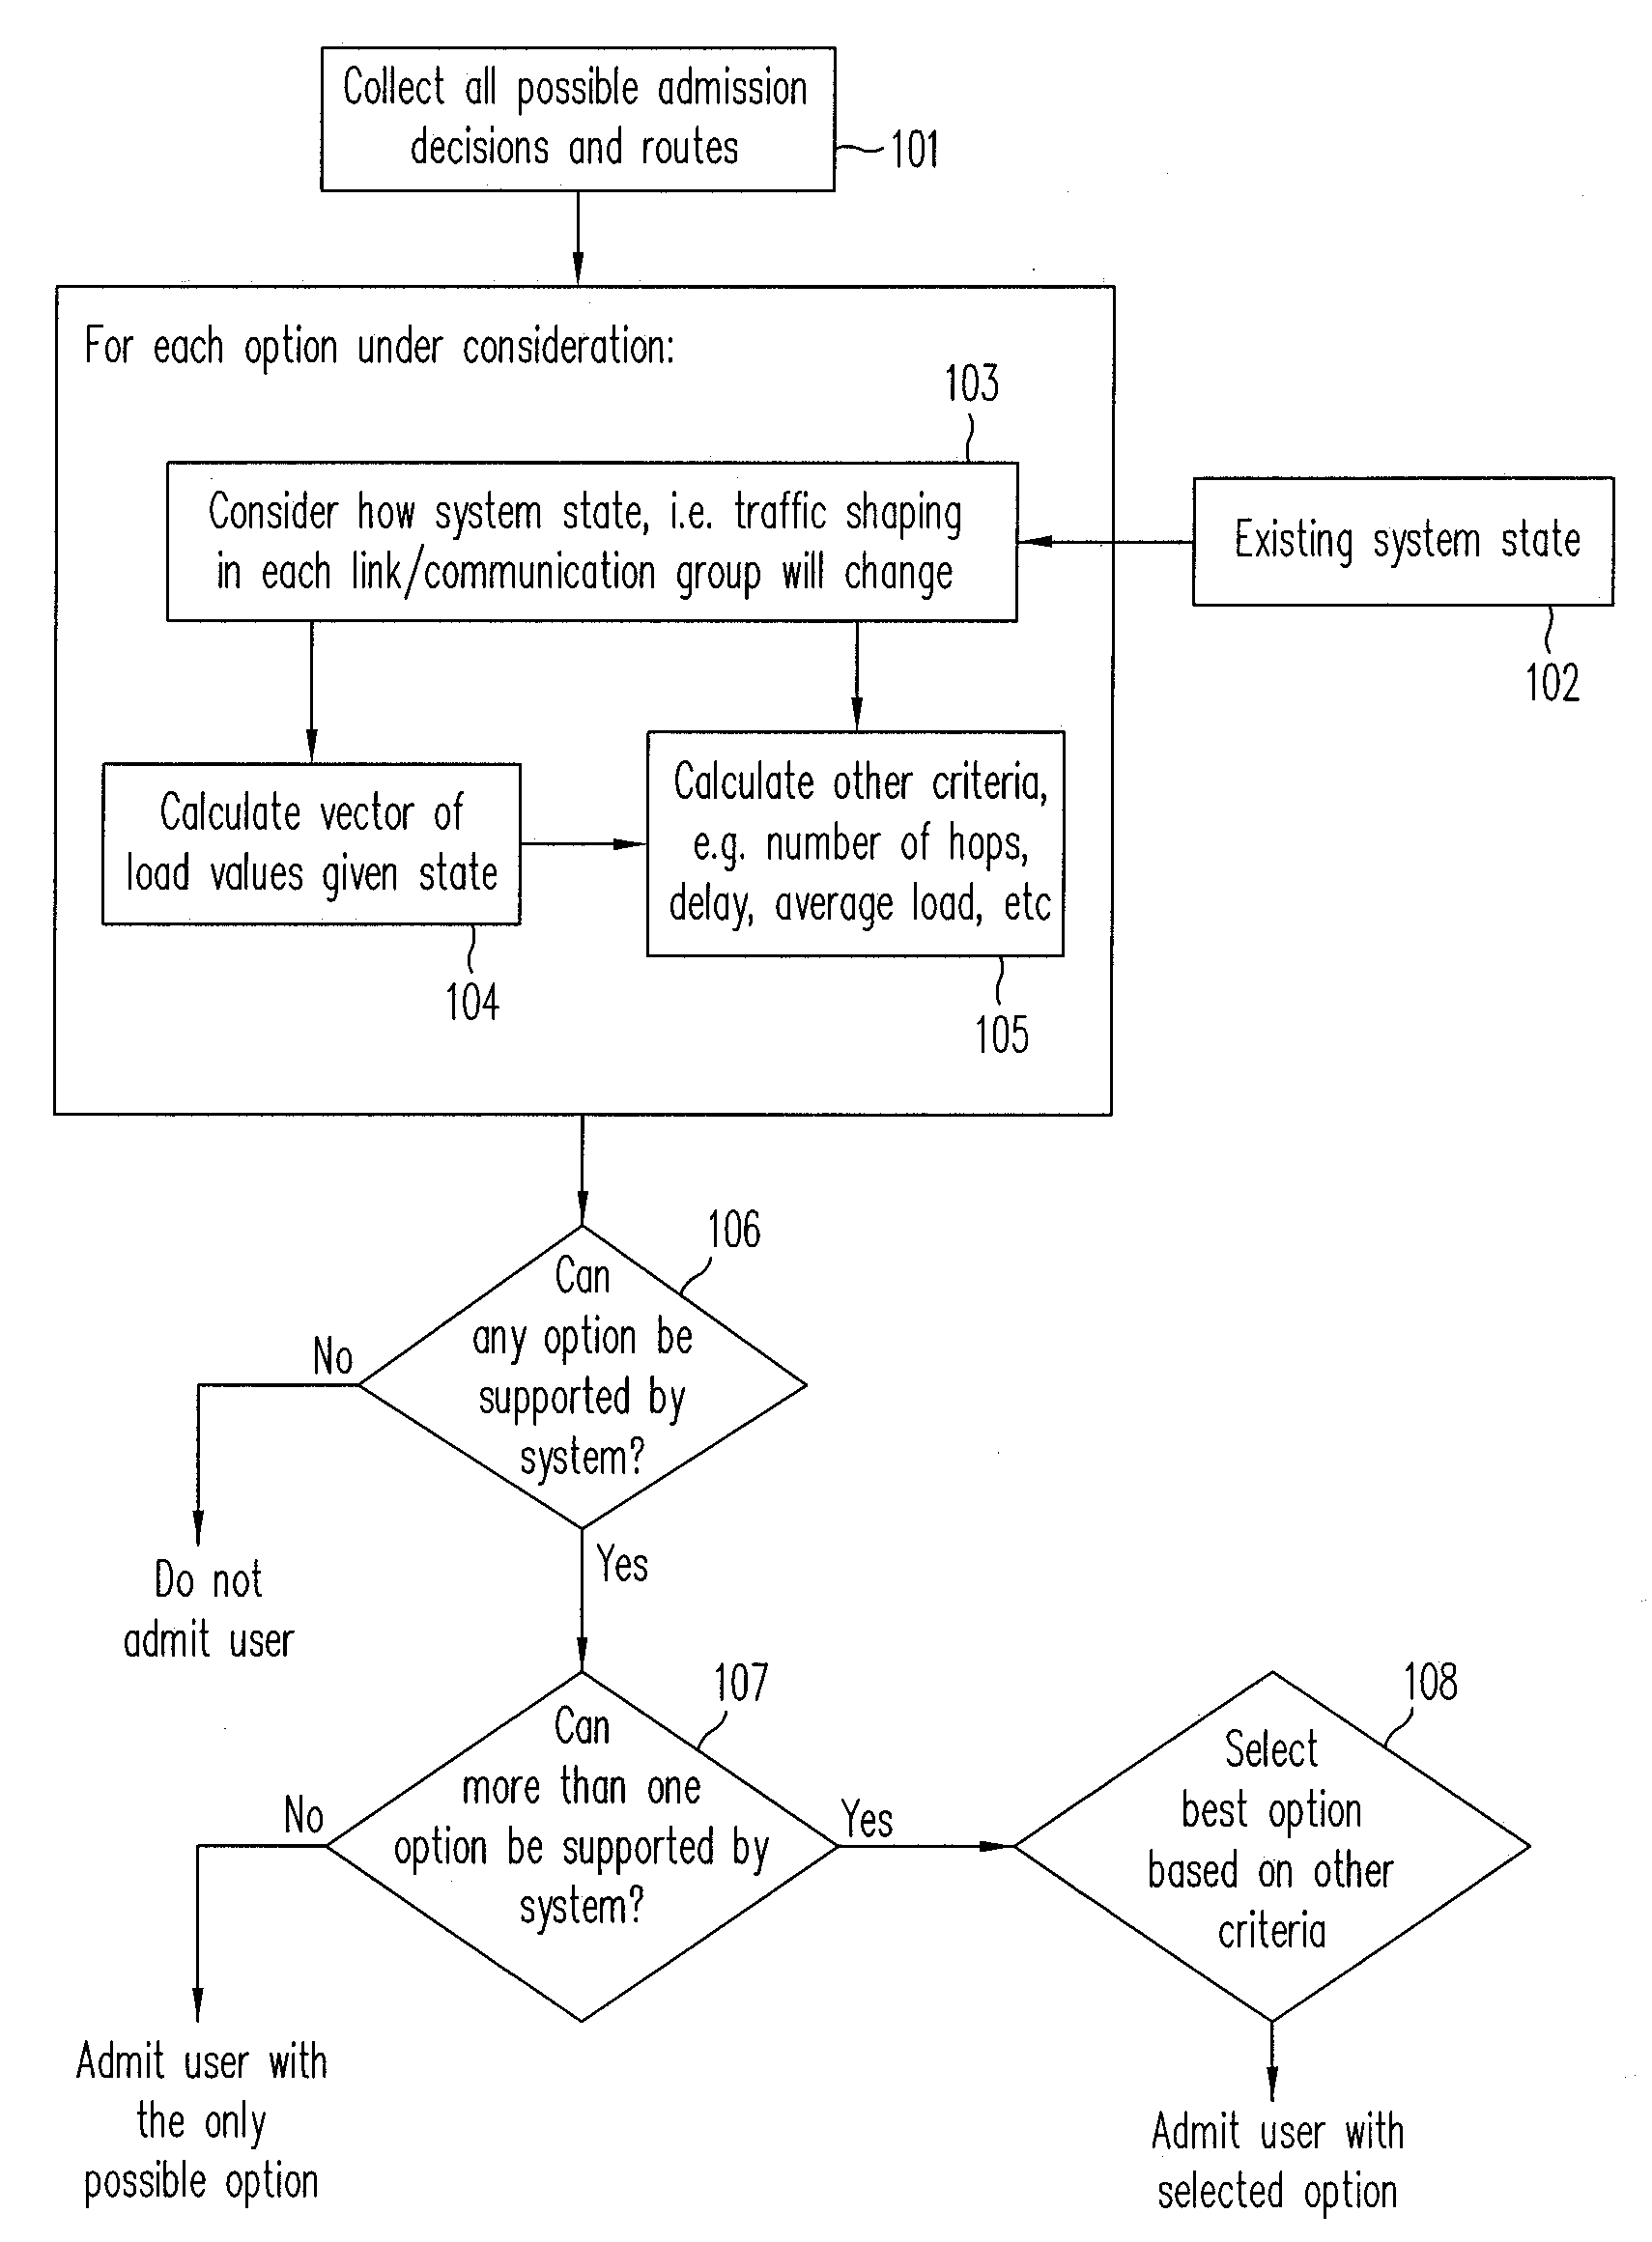 Method and apparatus for managing admission and routing in multi-hop 802.11 networks taking into consideration traffic shaping at intermediate hops